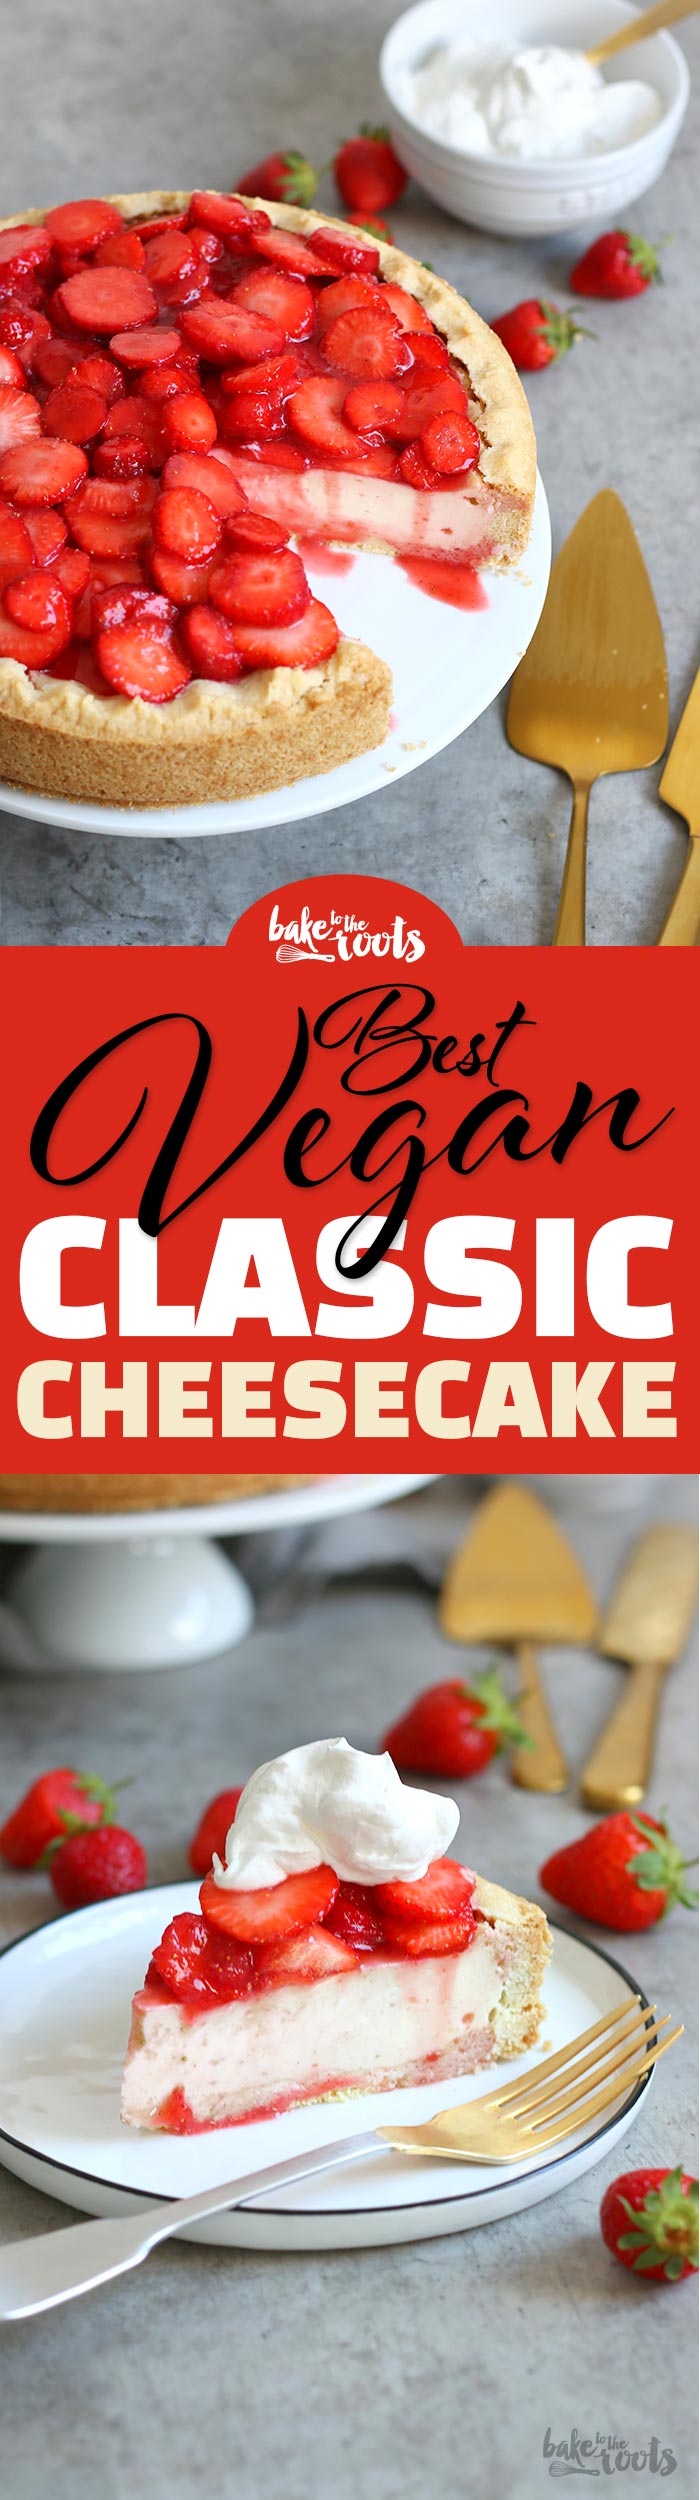 Best Vegan Classic Cheesecake | Bake to the roots